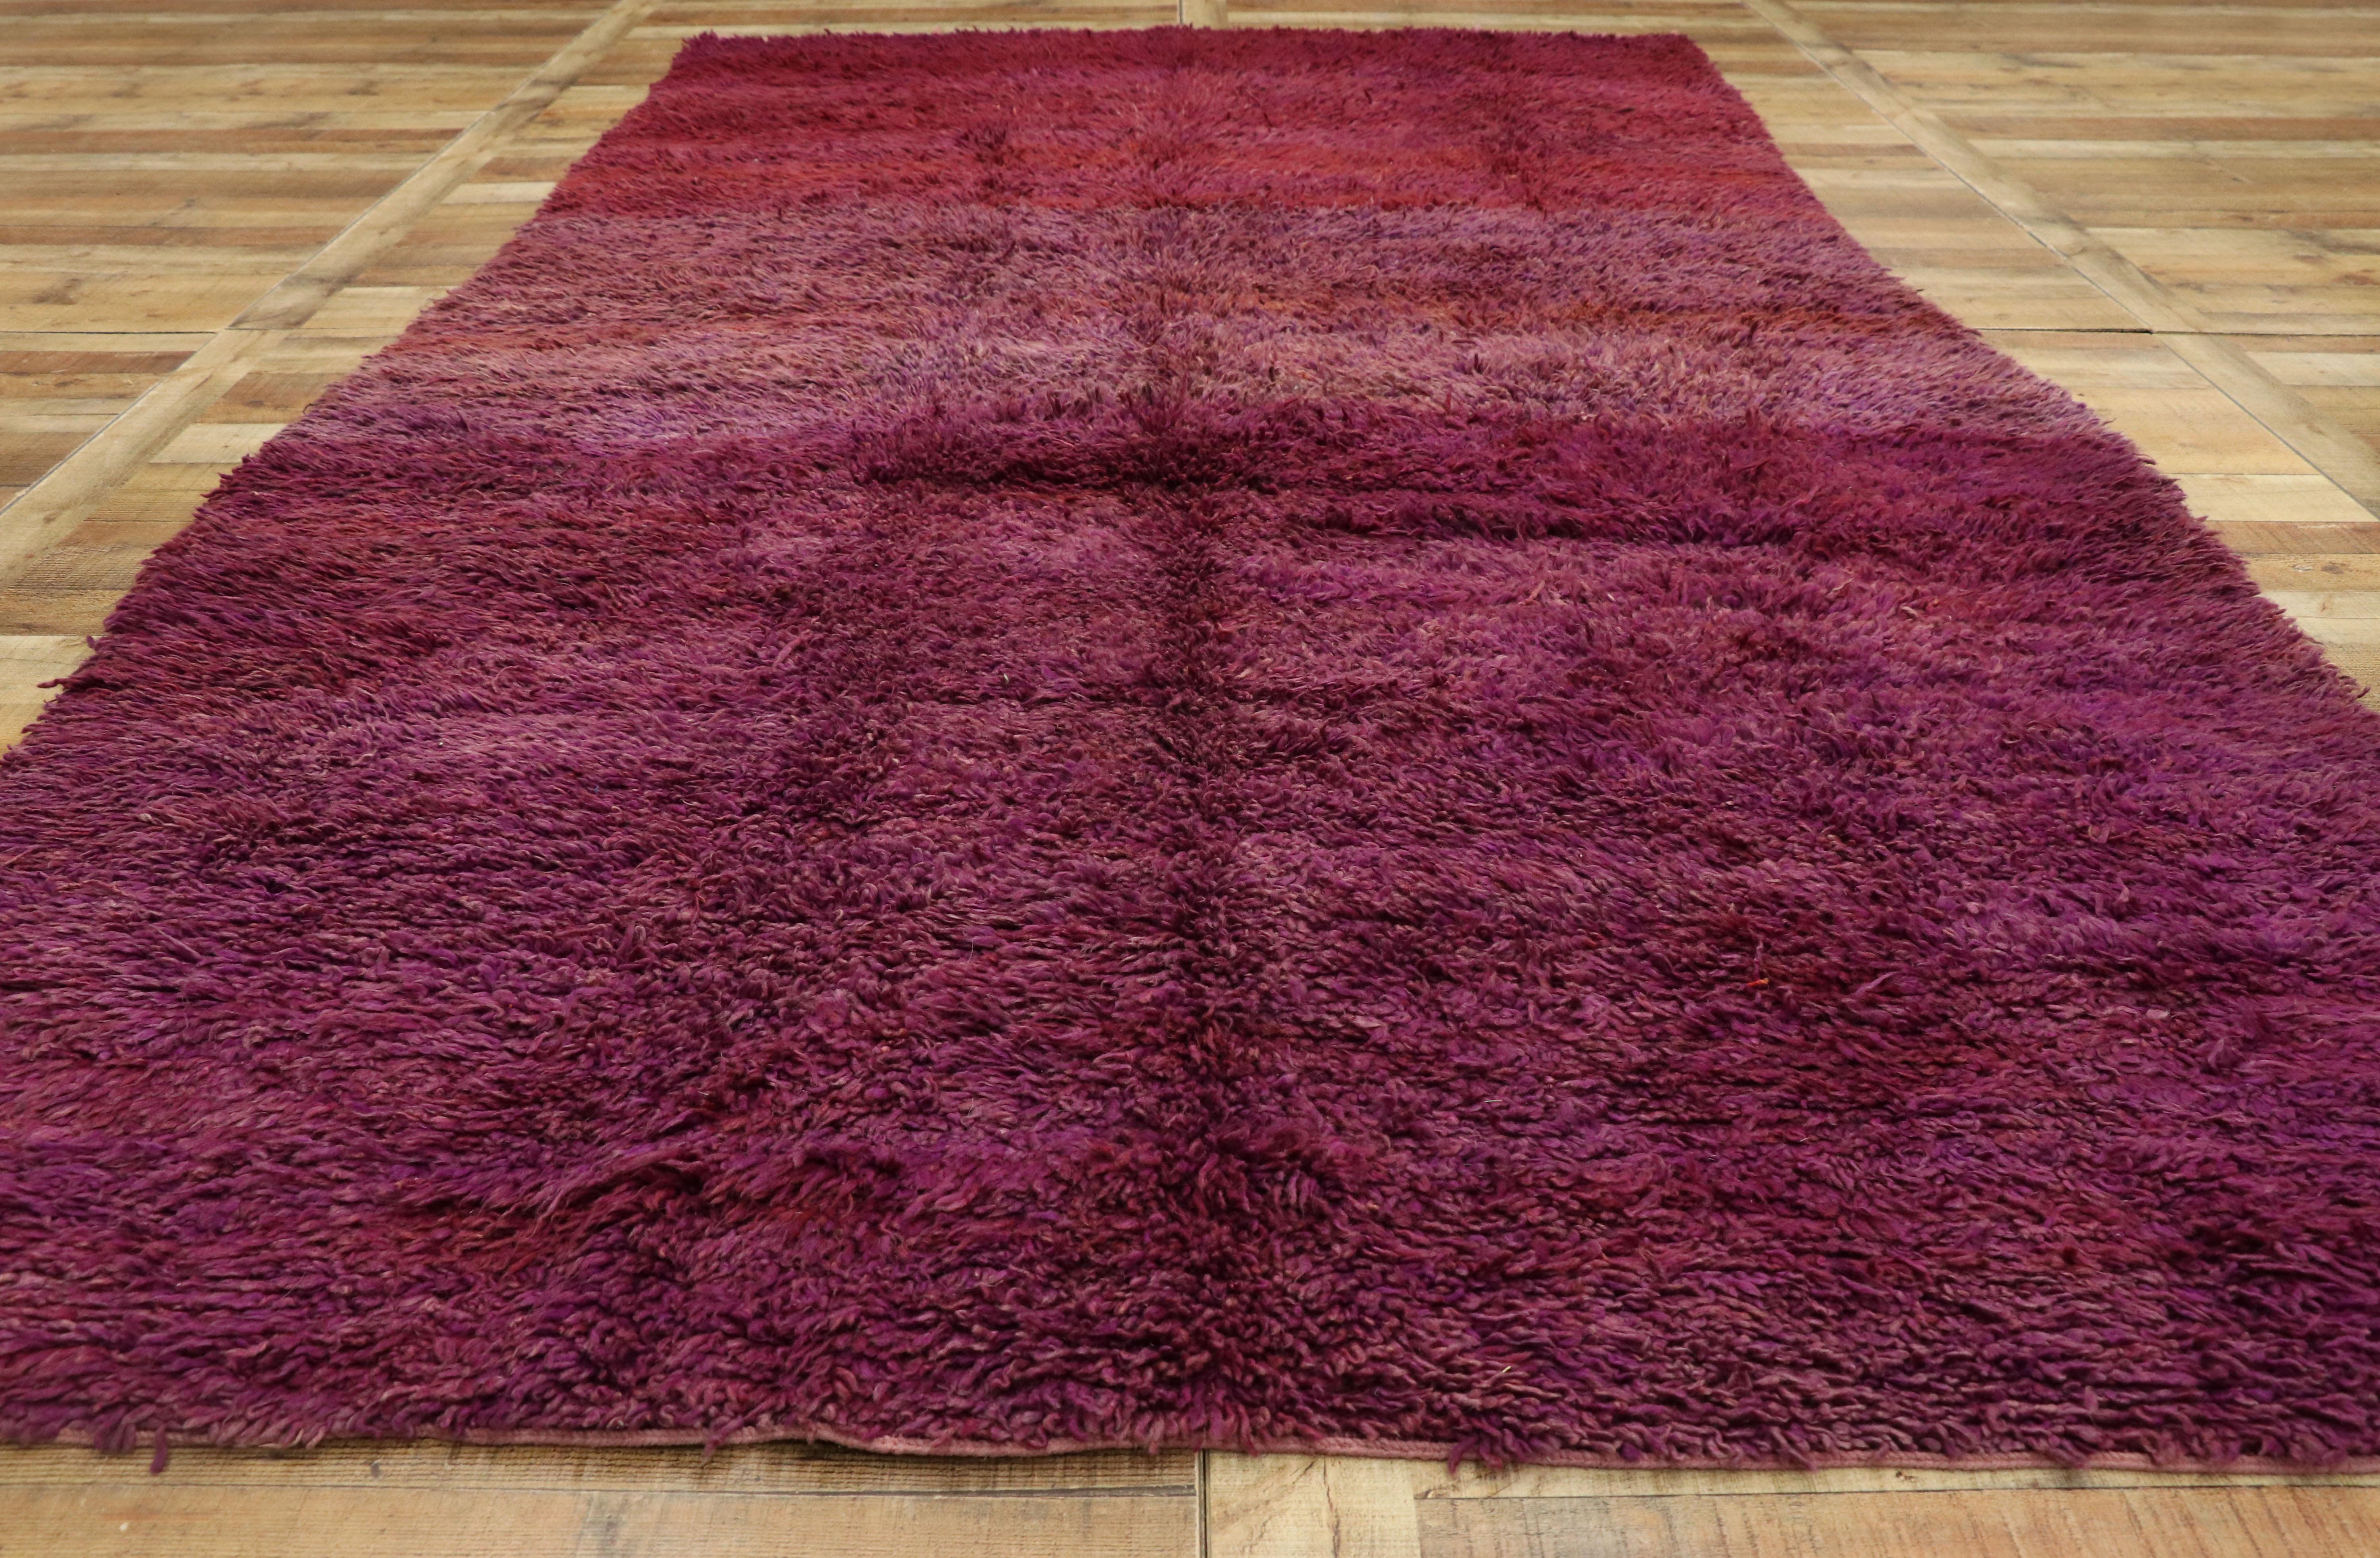 Vintage Berber Moroccan Rug with Cozy Hygge Bohemian Style For Sale 1